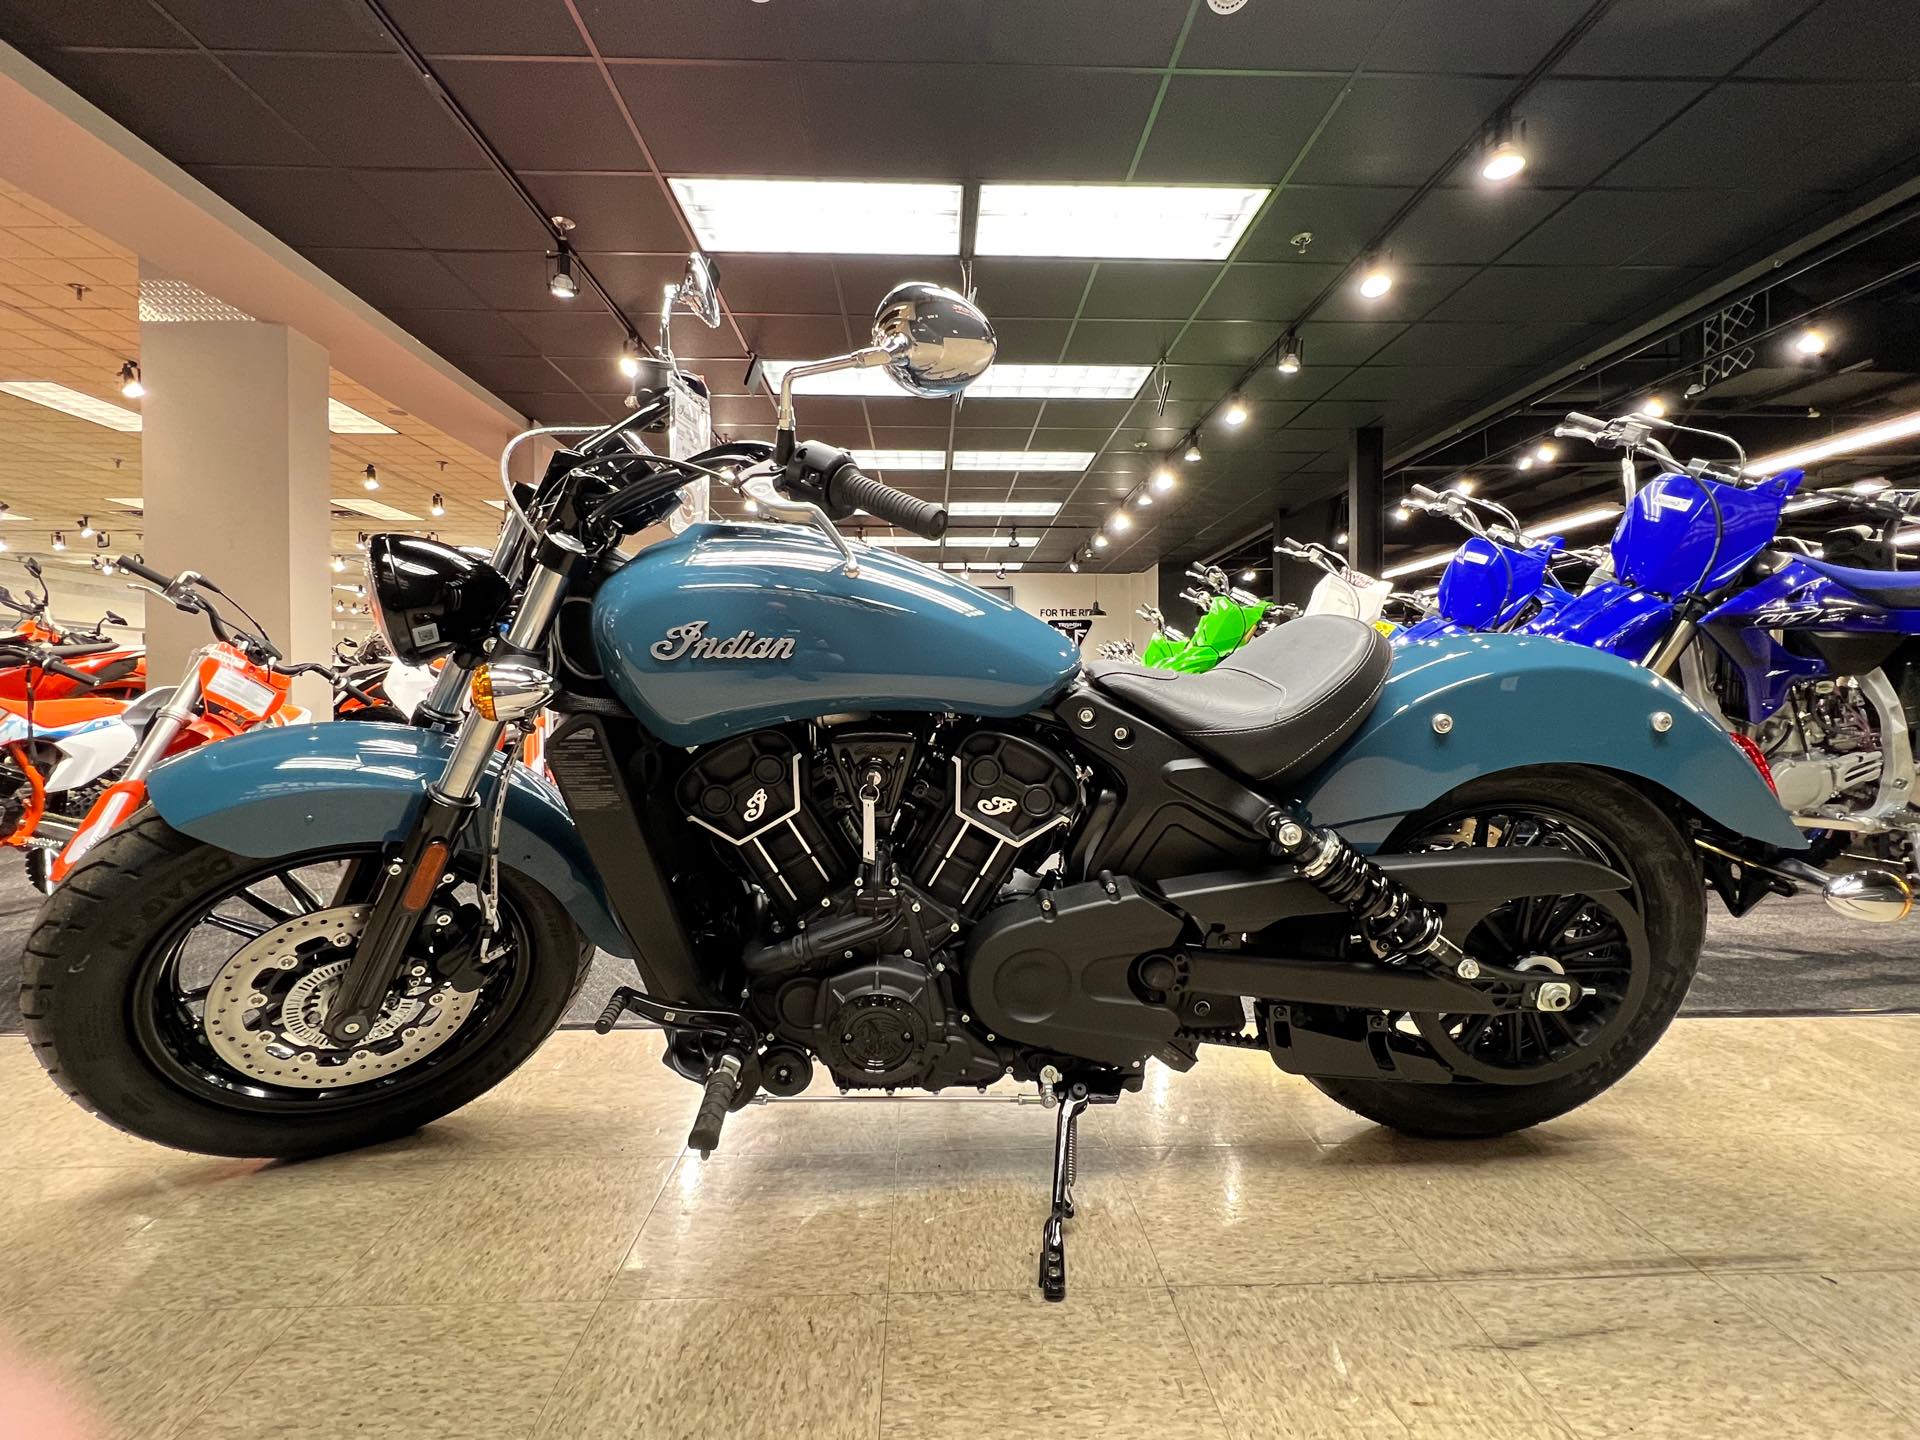 2023 Indian Motorcycle Scout Sixty at Sloans Motorcycle ATV, Murfreesboro, TN, 37129